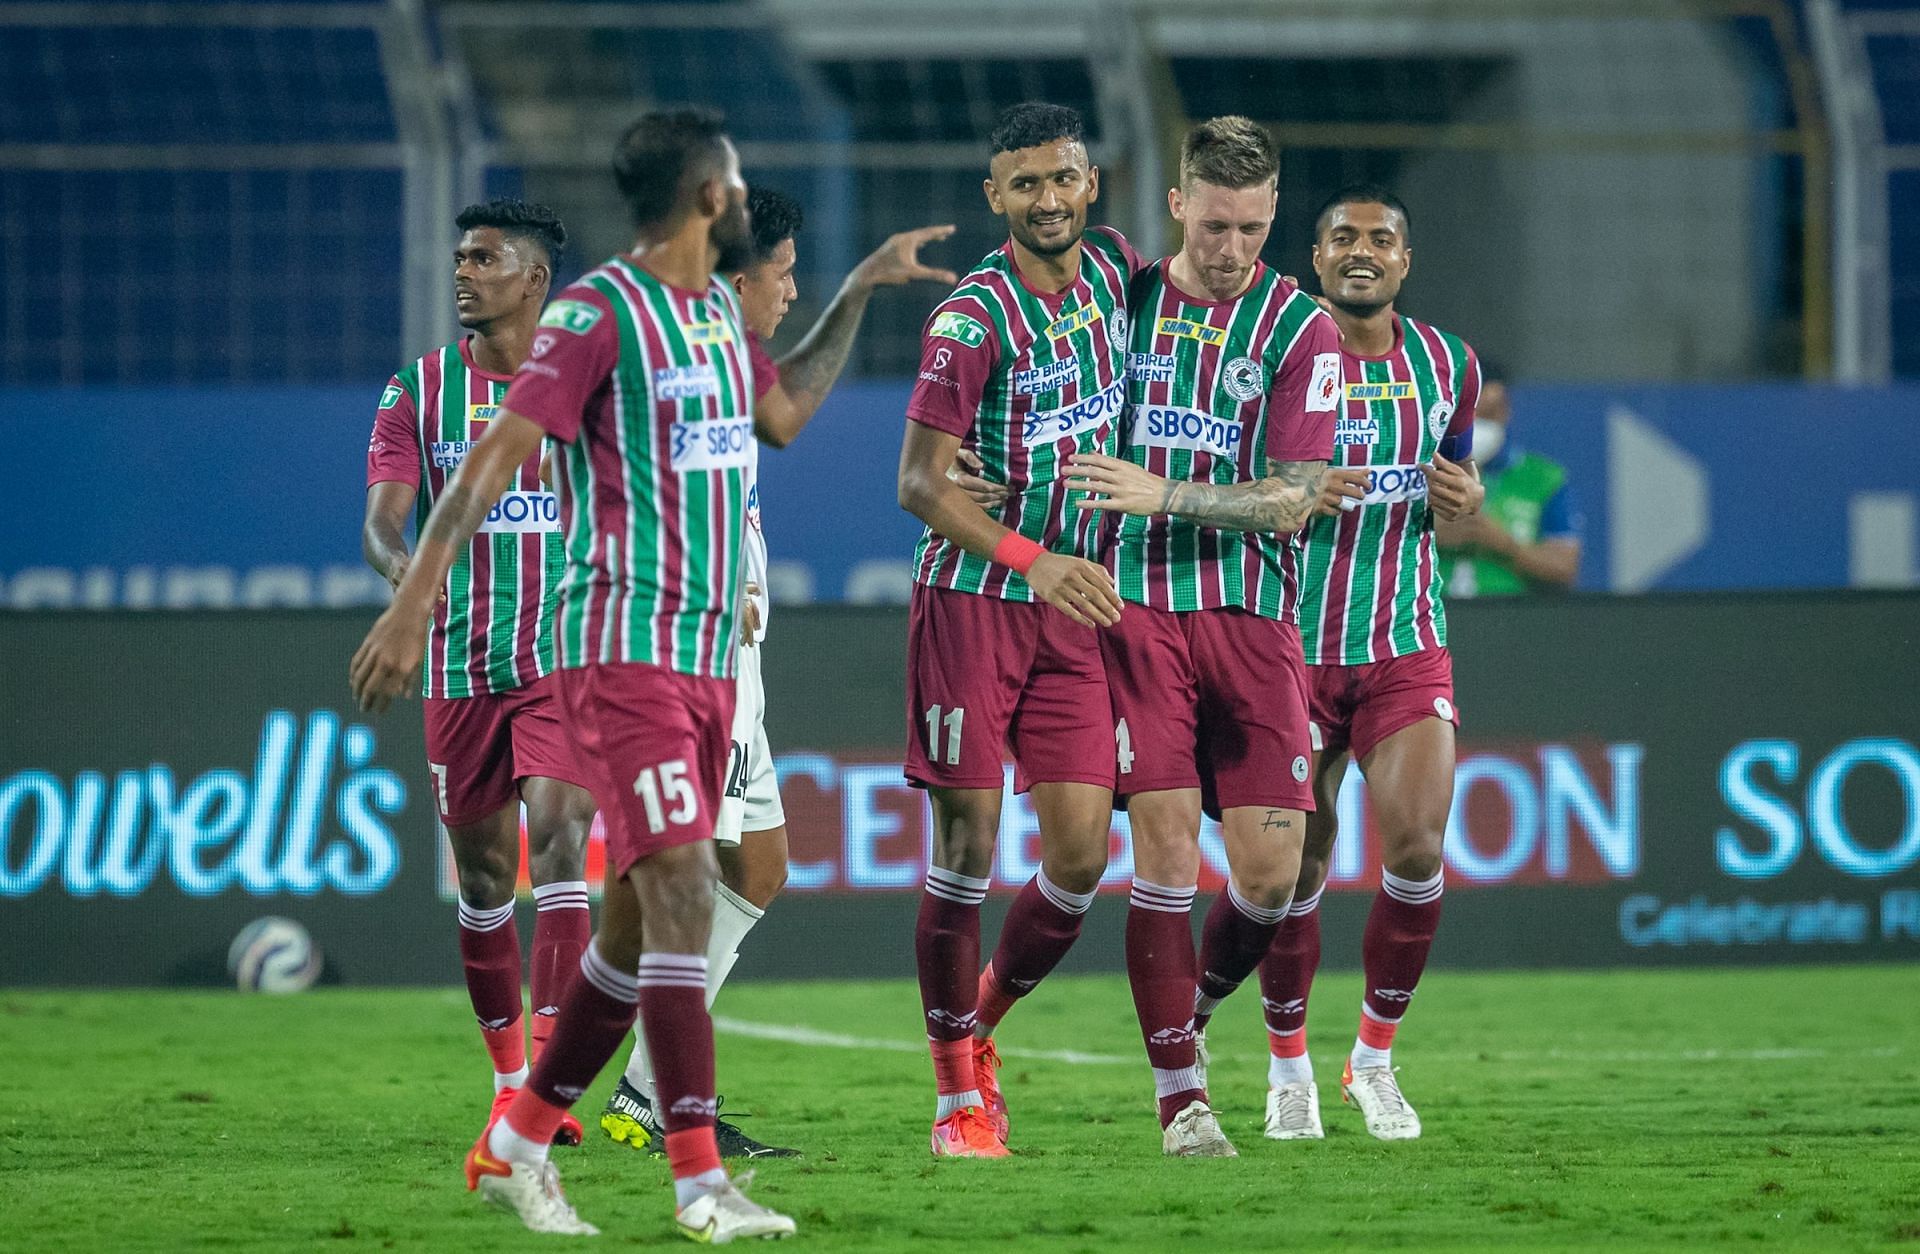 The Mariners celebrate their goal against the Highlanders (Image Courtesy: ISL)